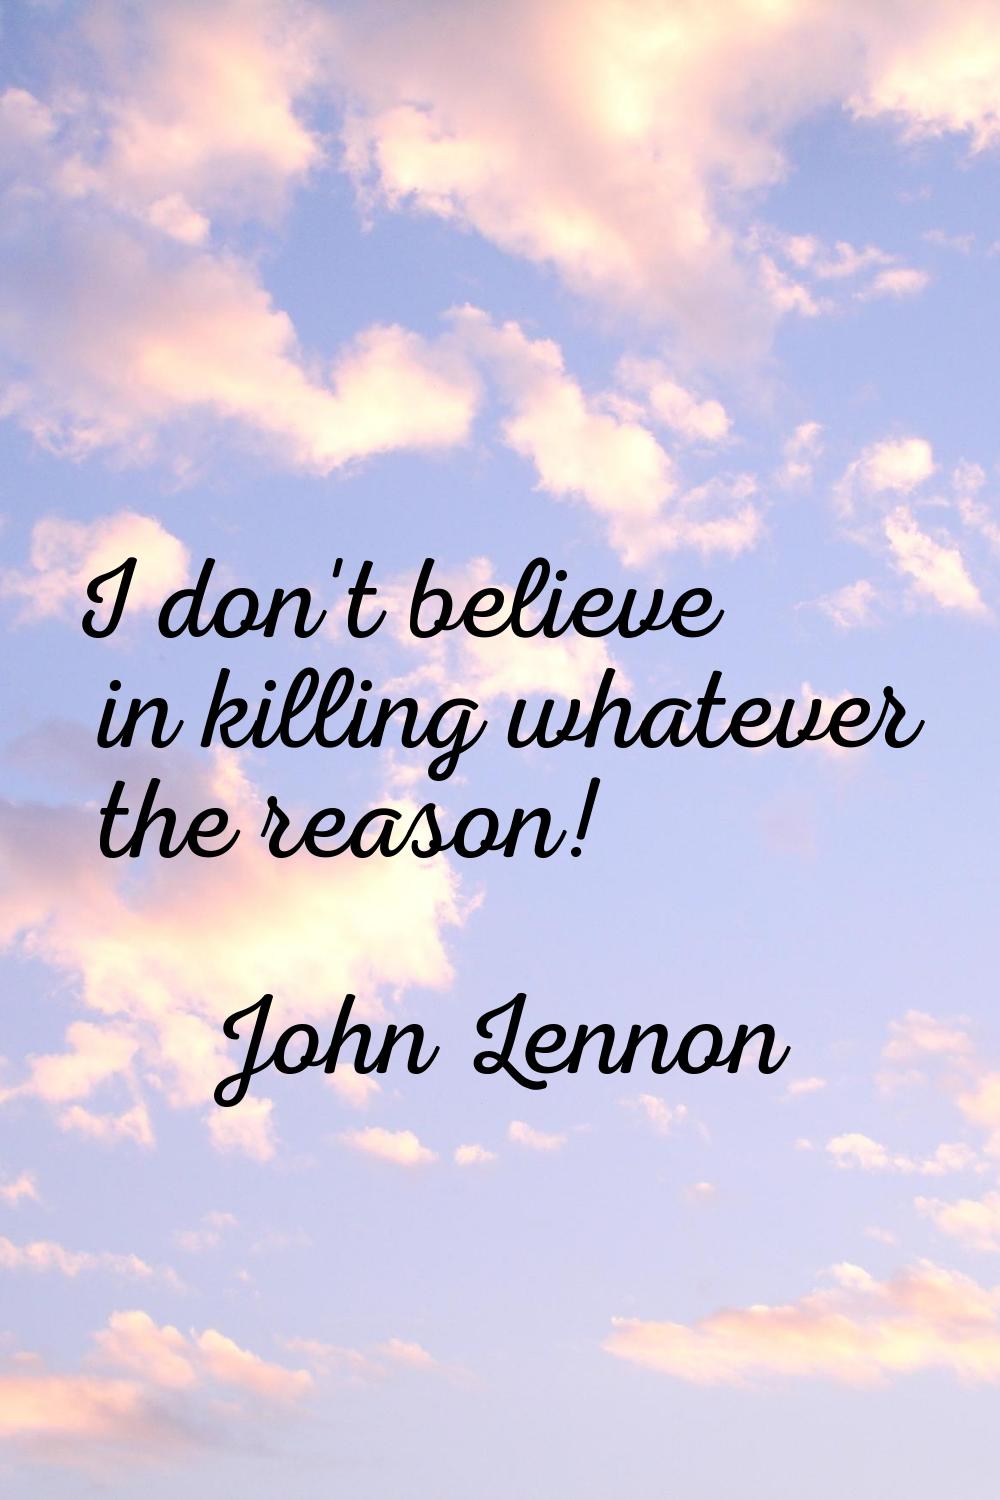 I don't believe in killing whatever the reason!